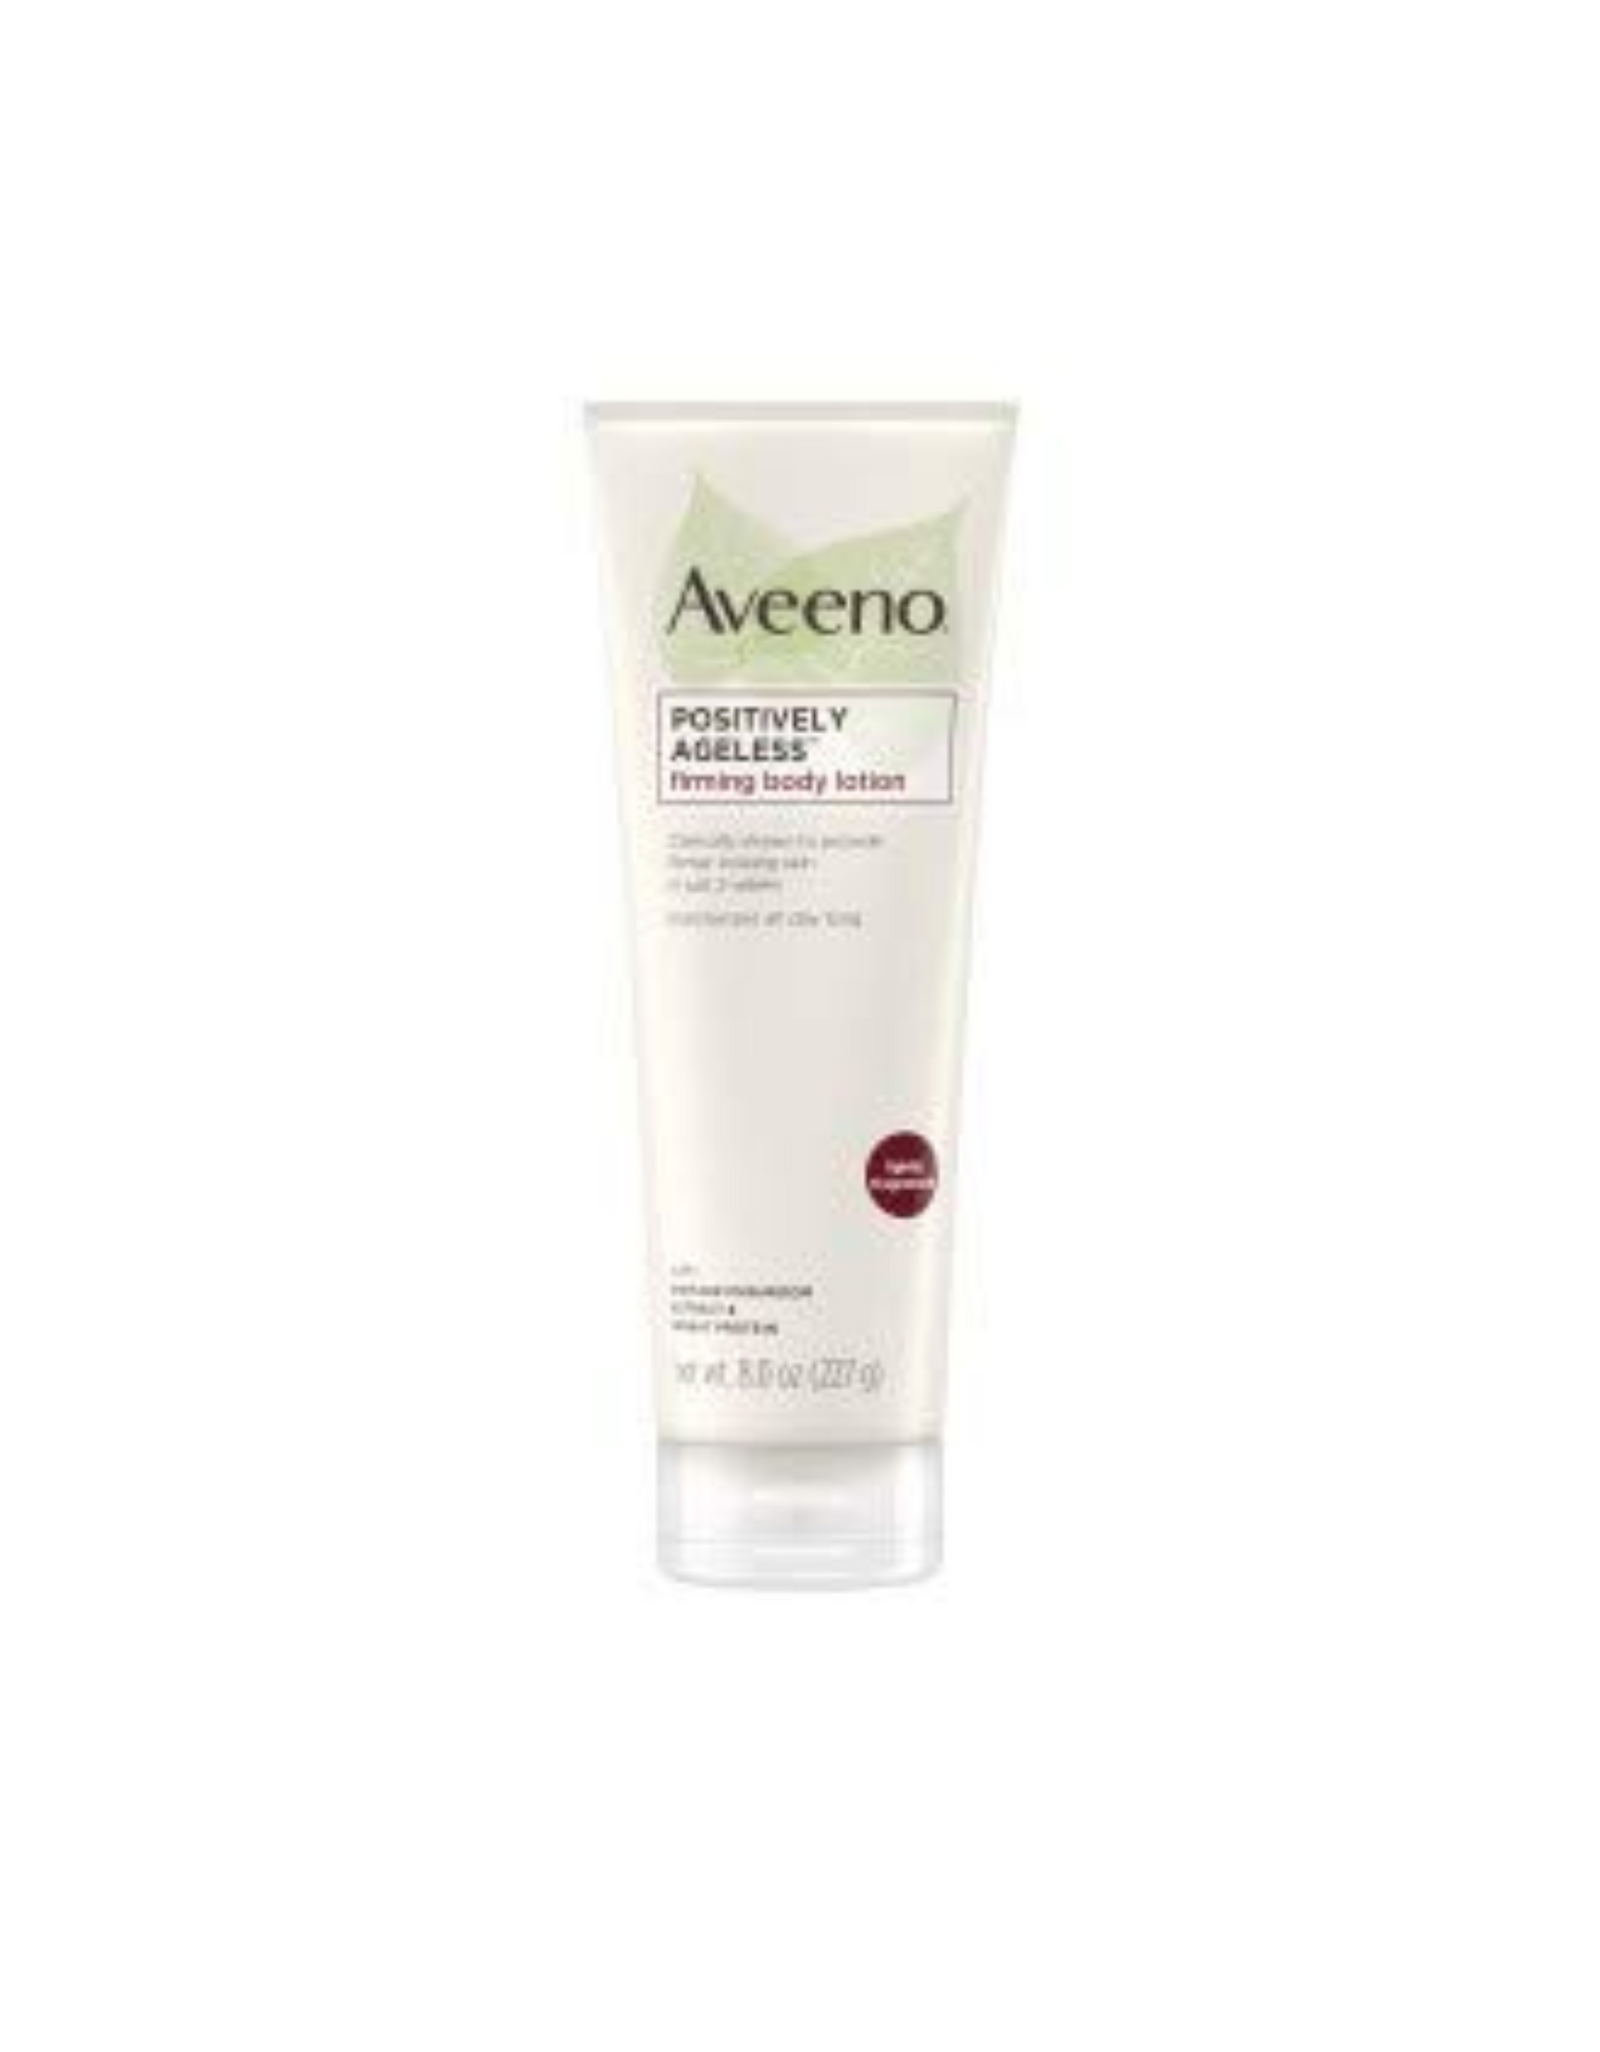 Aveeno Positively Ageless Anti-Aging Firming Body Lotion with Shiitake Mushroom Extract & Wheat Protein, 8 oz